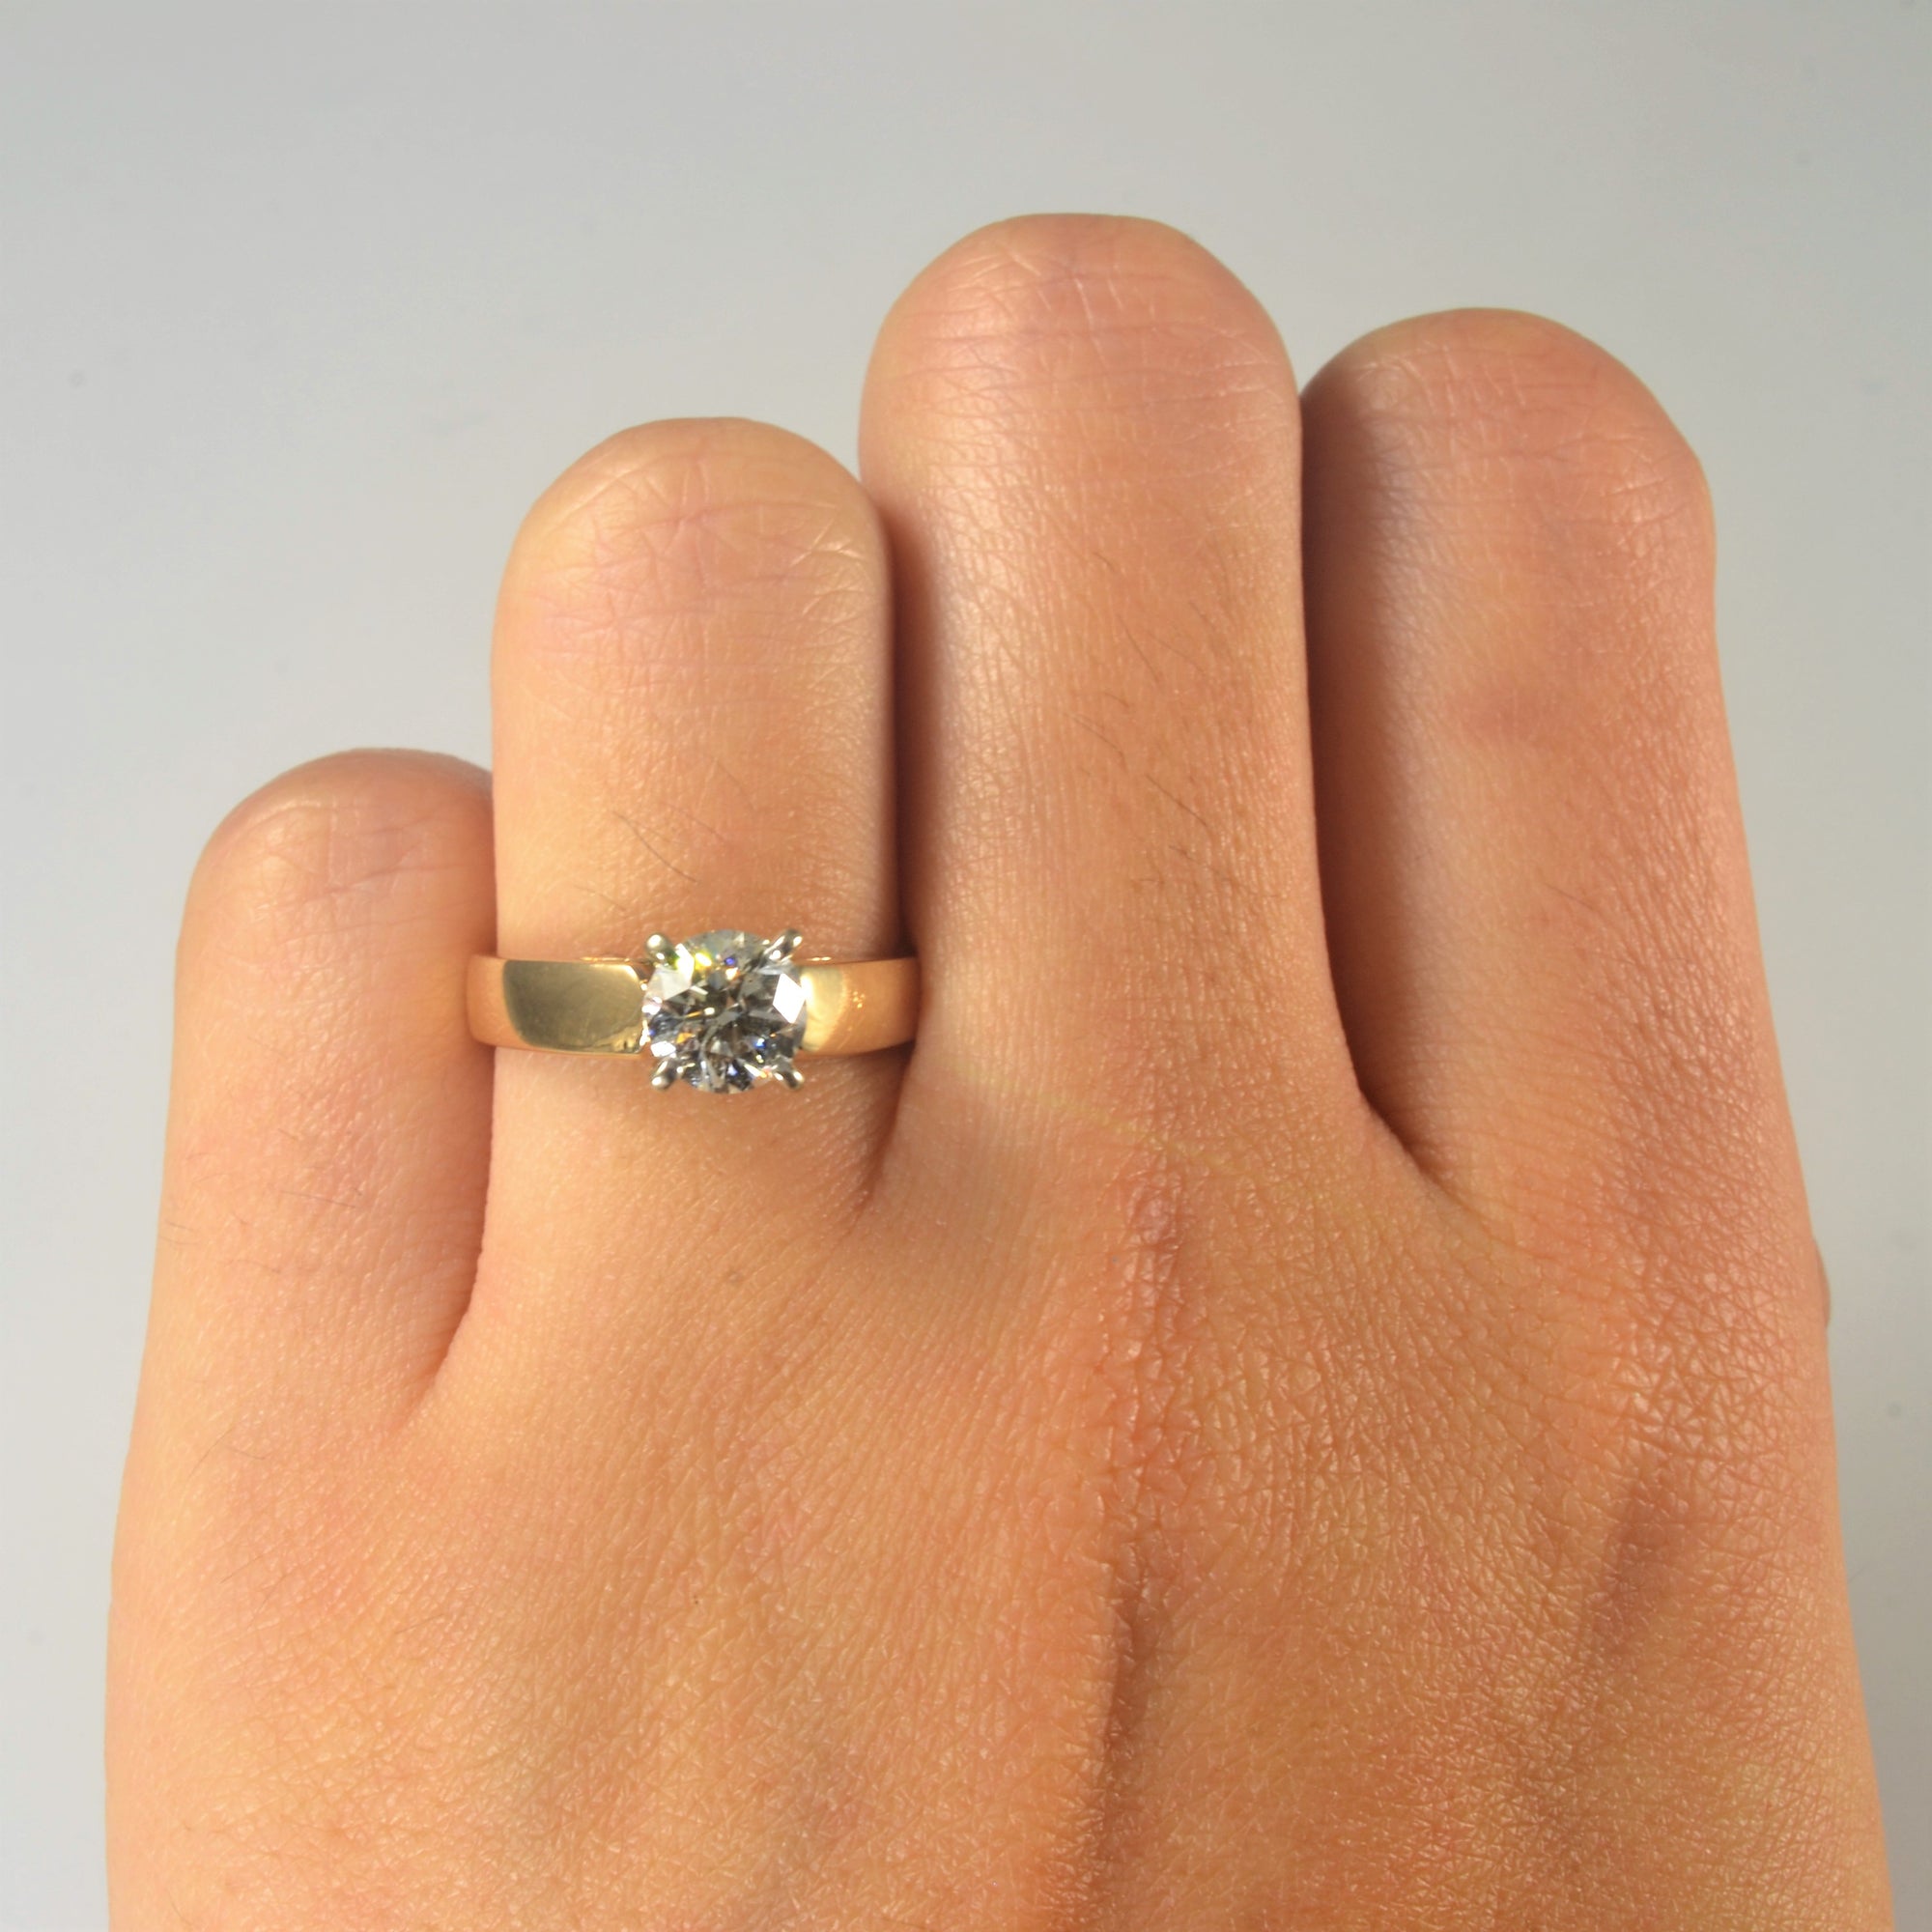 Canadian Solitaire Diamond Engagement Ring | 1.00ct | SZ 5.75 |